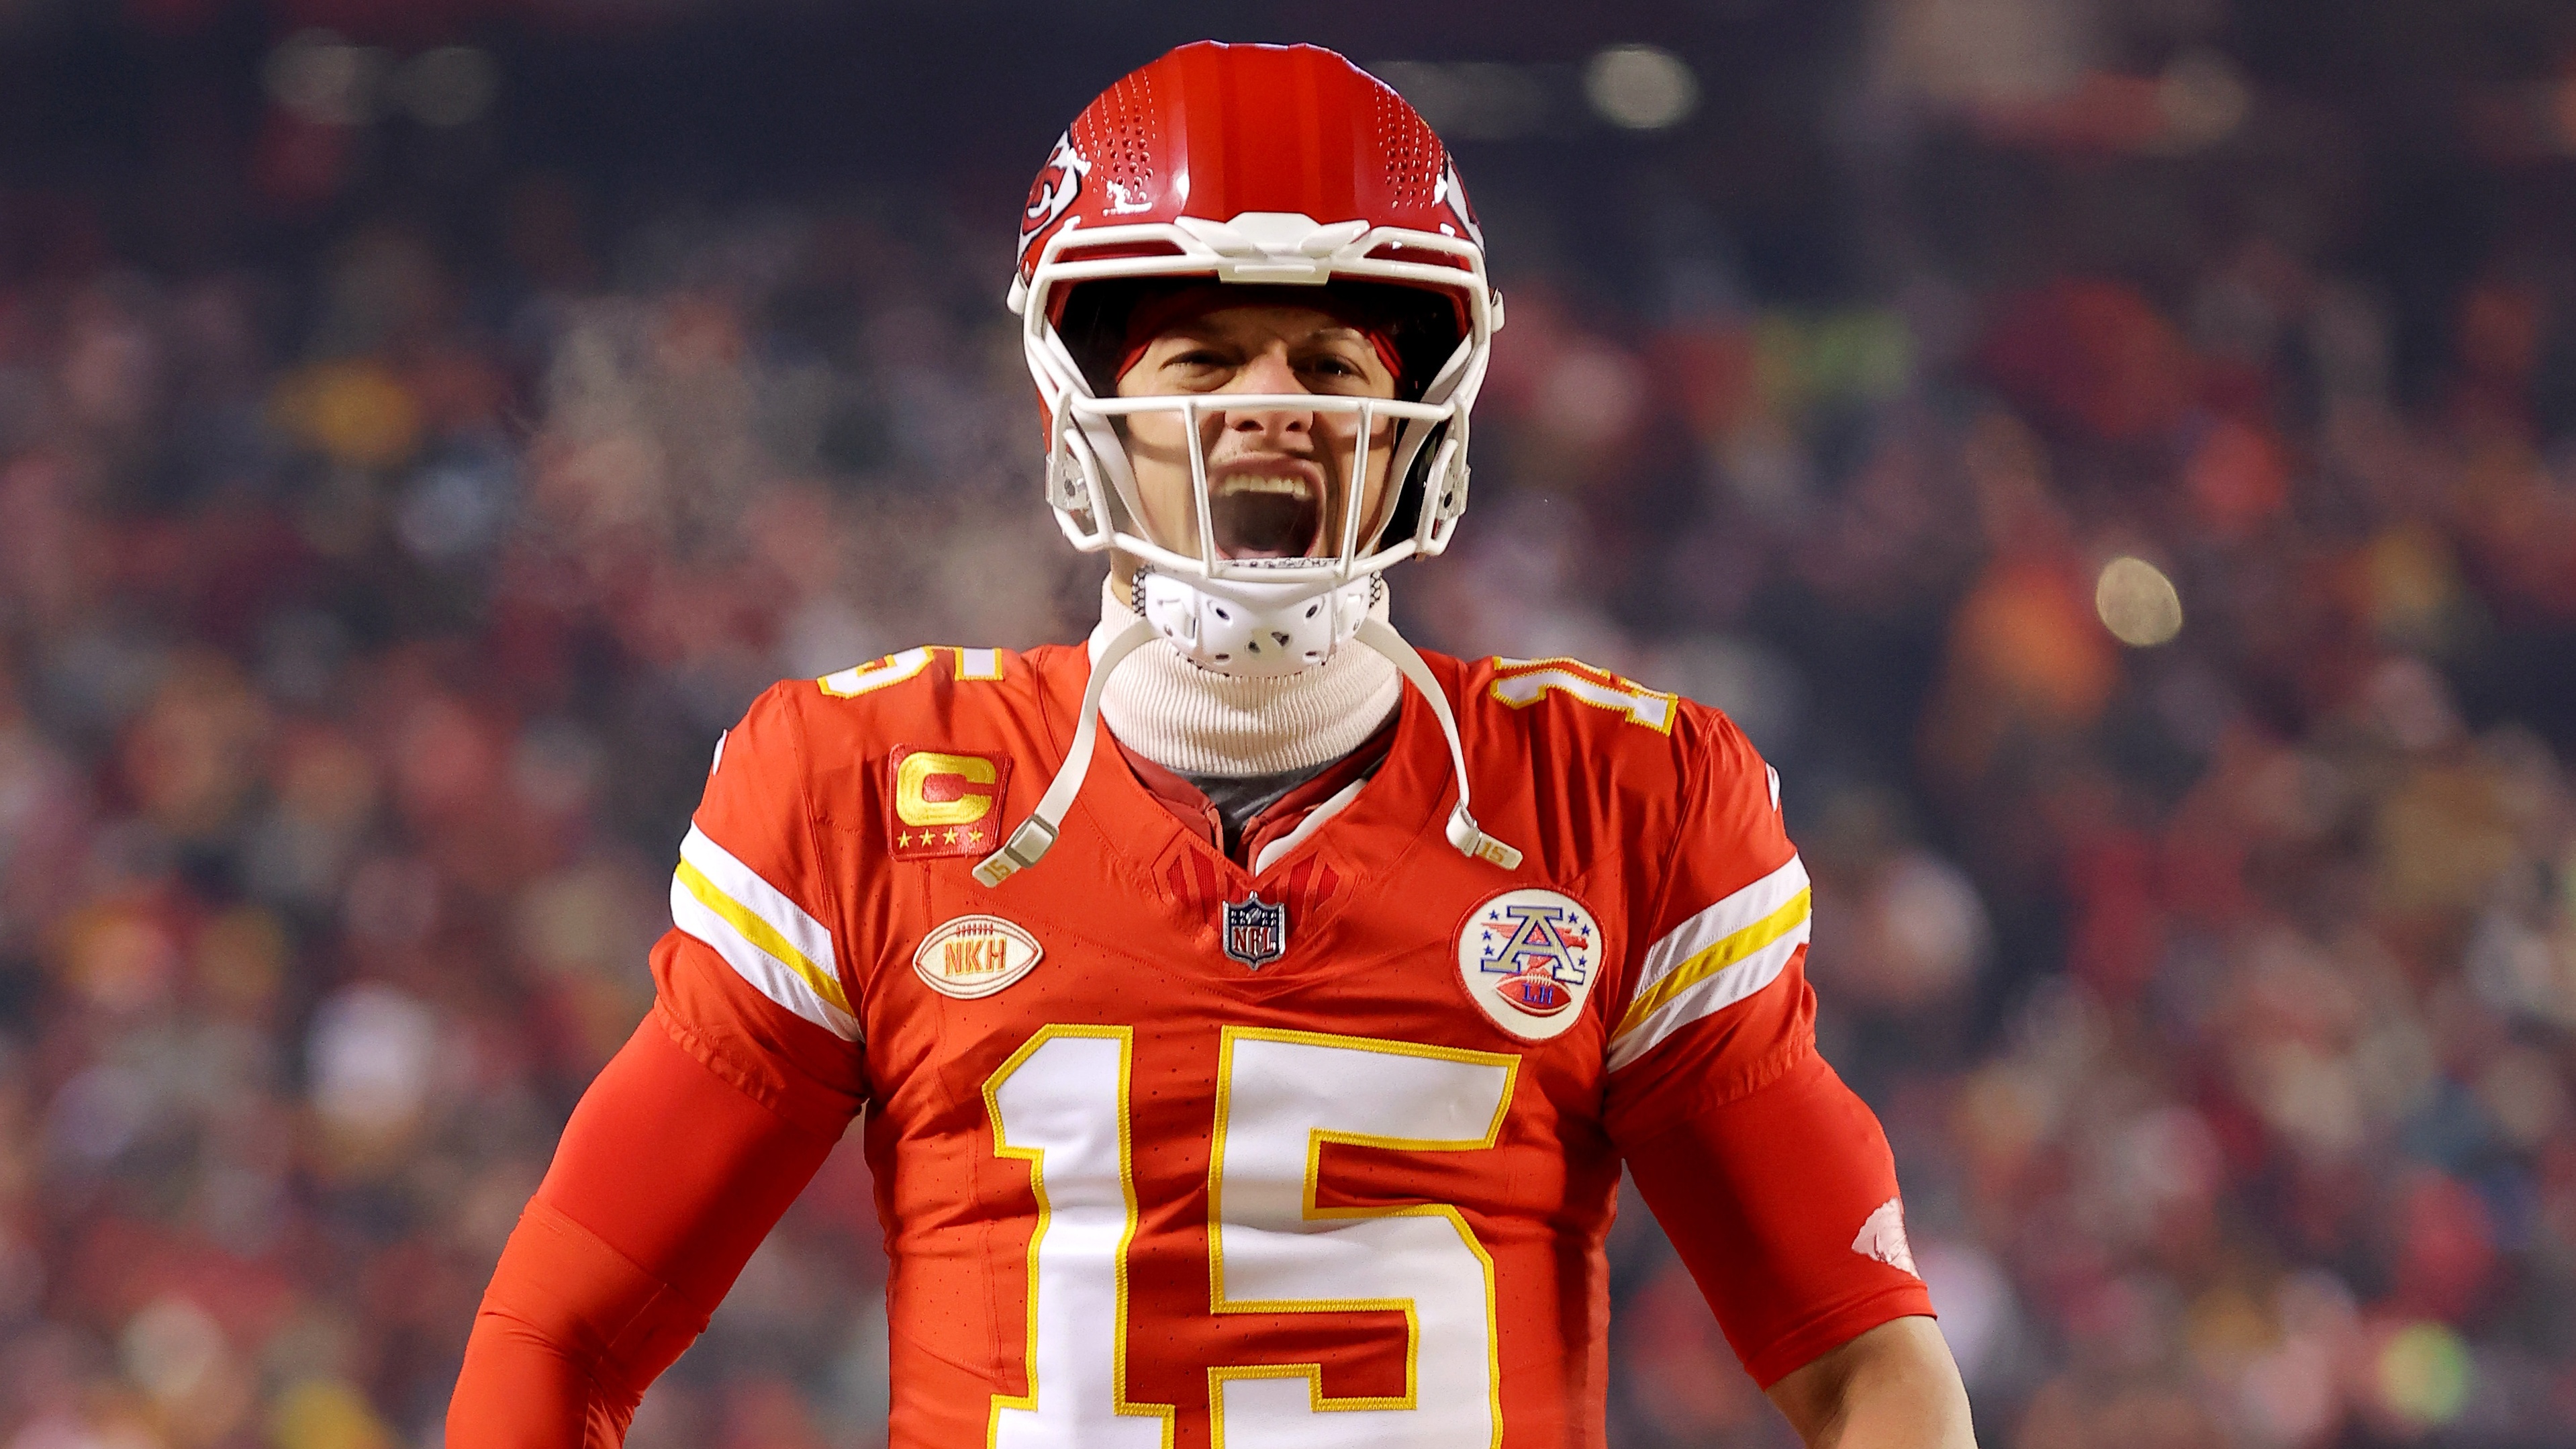 Chiefs vs Bills live stream how to watch NFL Divisional game online